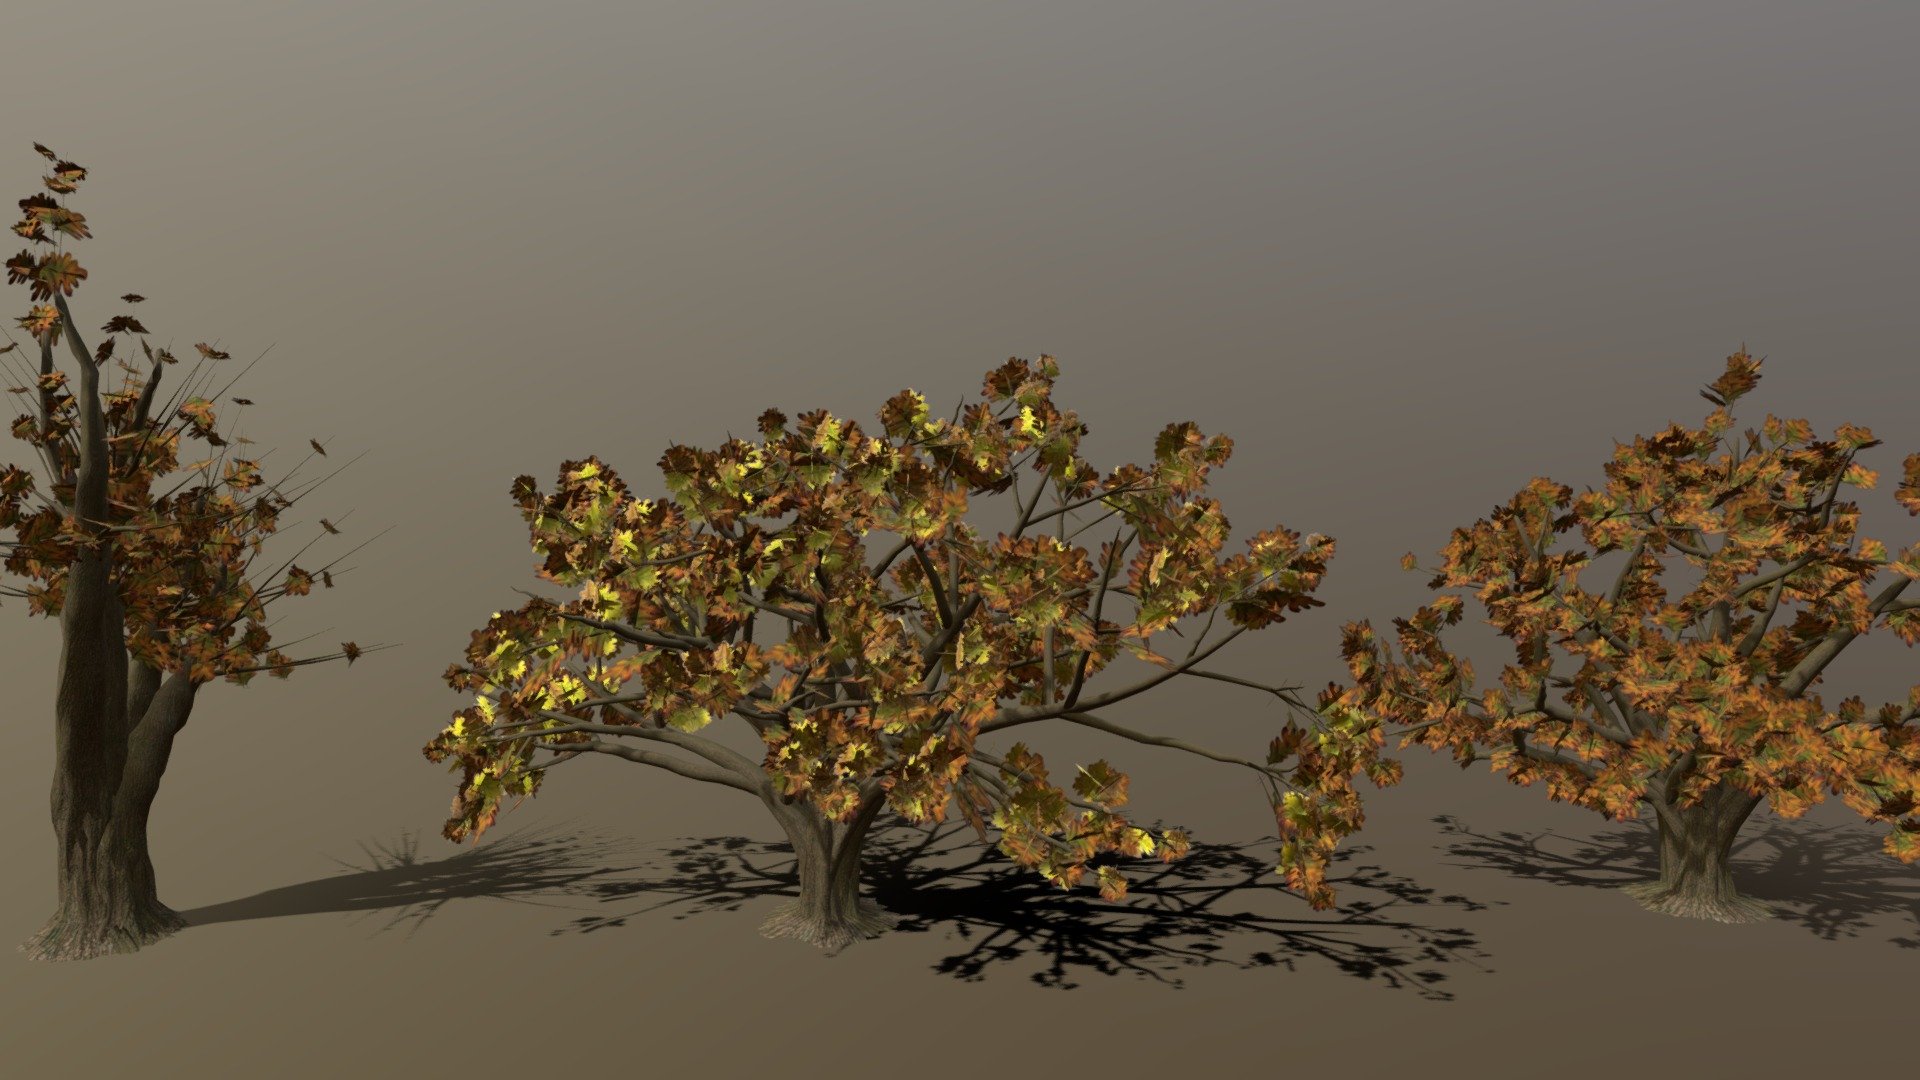 These Oak trees were created as part of a park environment.
The trees were modeled using ther TreeIt Program and textured using Quixel Mixer.
The textrue resolution of the oak tree bark is 2048 3d model